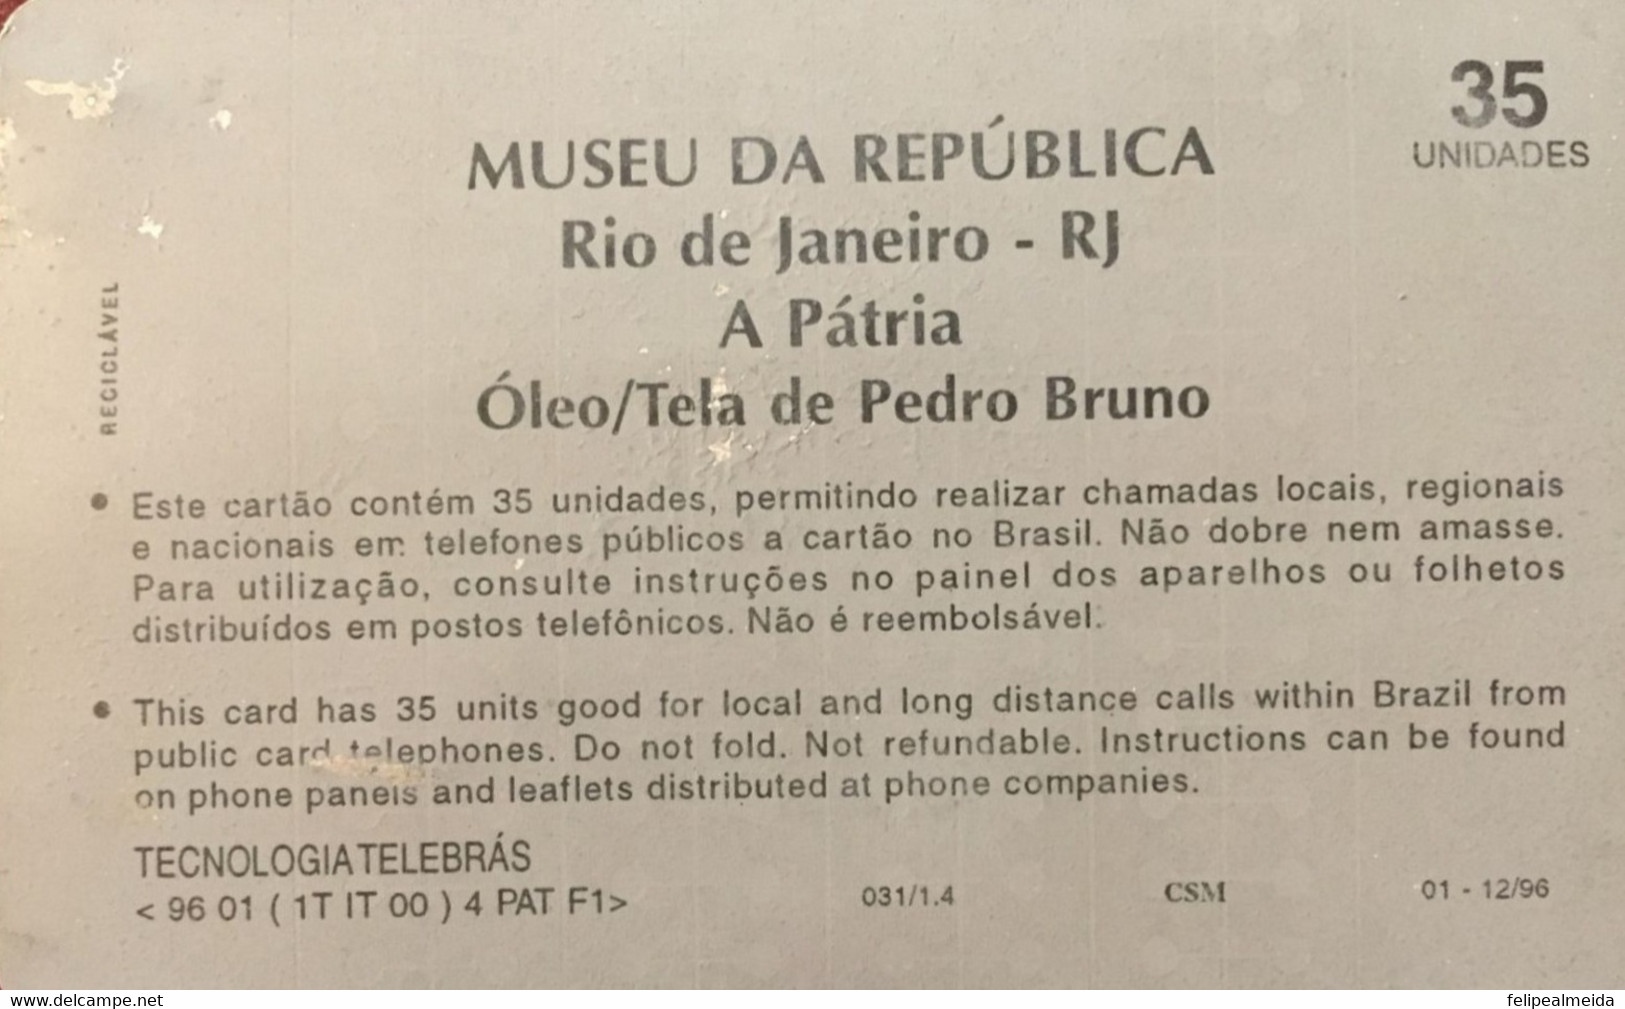 Phone Card Manufactured By Telebras In 1996 - Series Museums - Painting A Pátria - Painter Pedro Bruno - Exhibited At Th - Peinture